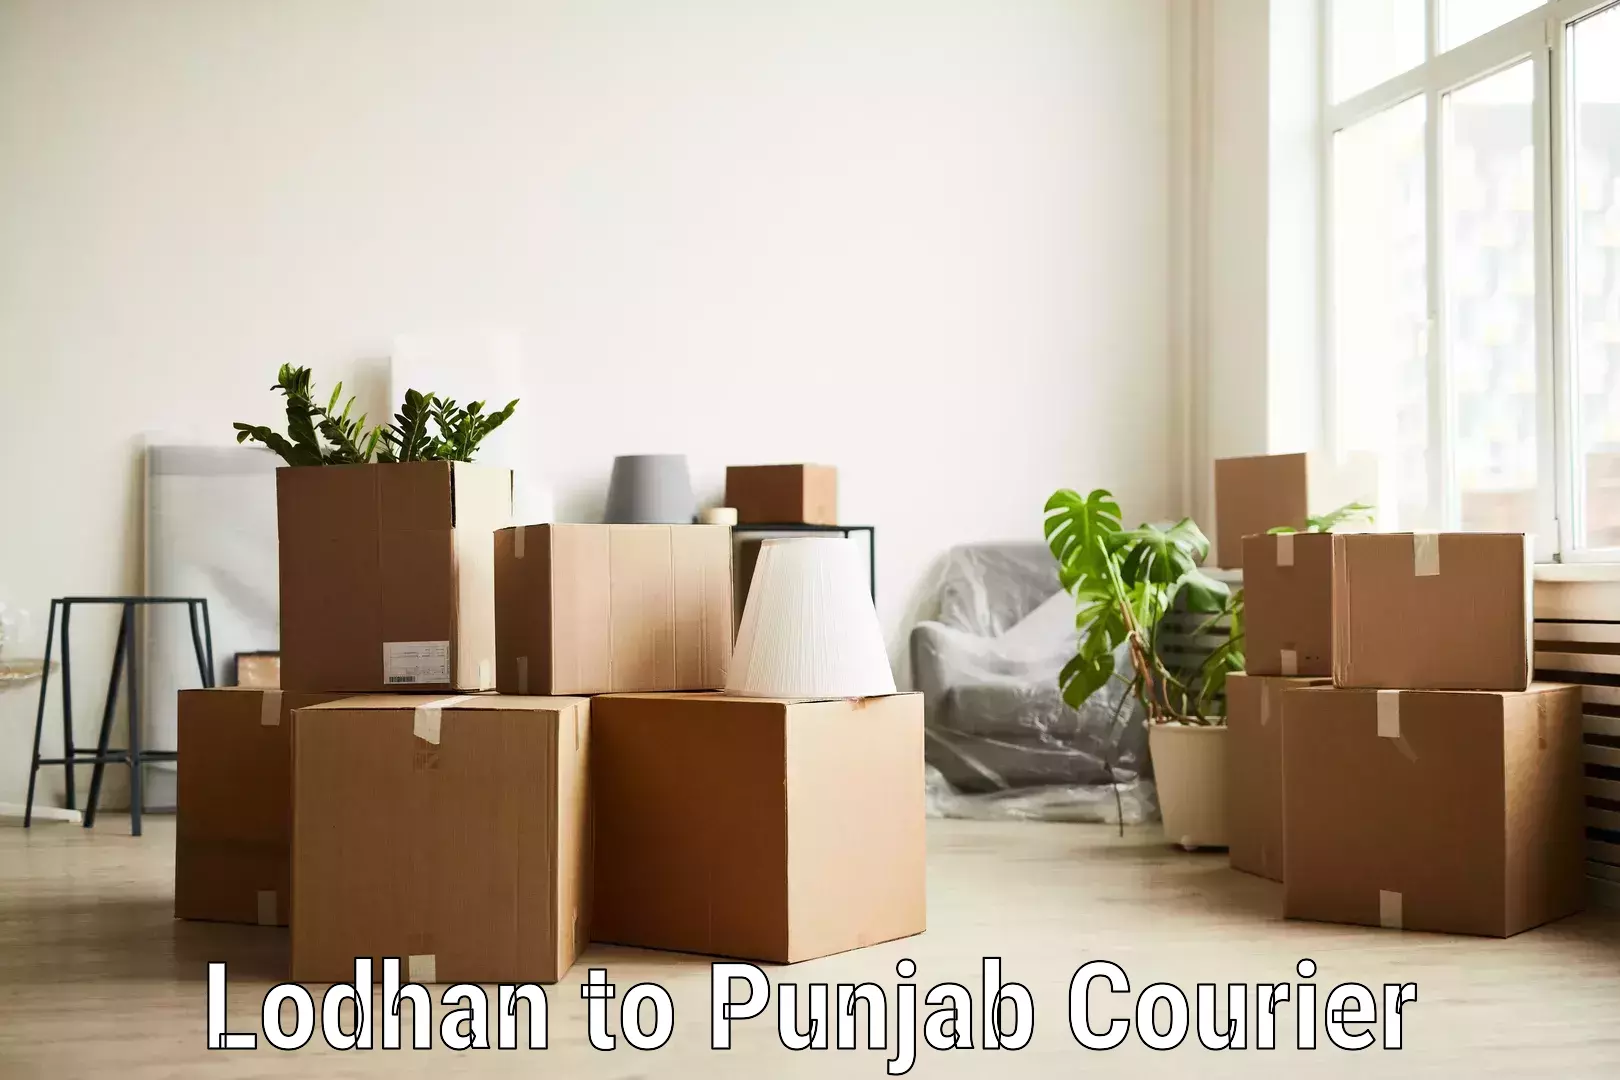 Flexible delivery schedules Lodhan to Punjab